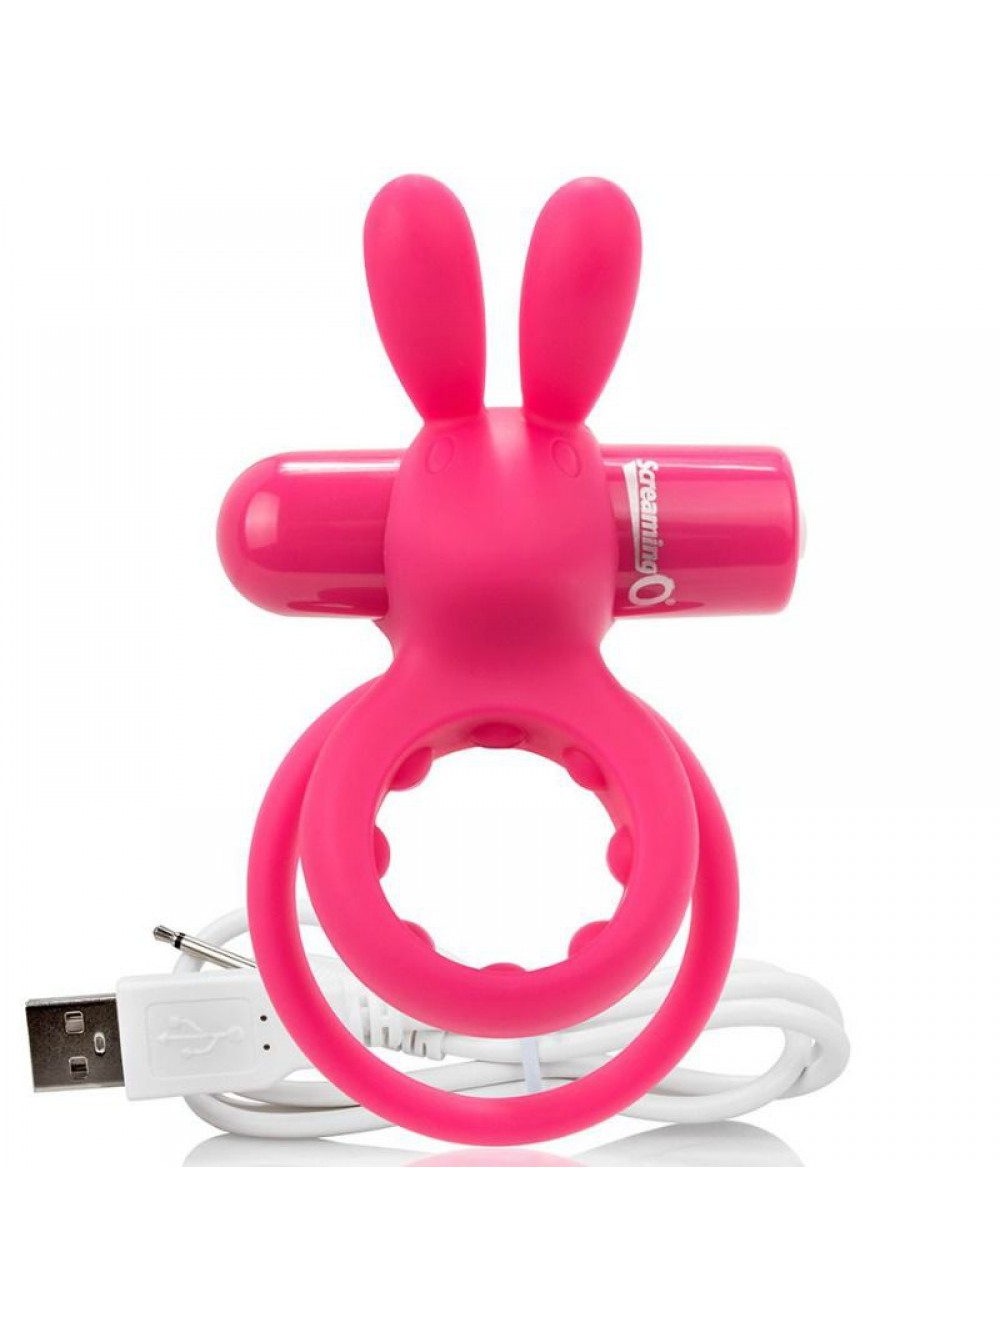 SCREAMING O RECHARGEABLE VIBRATING RING WITH RABBIT - O HARE- PINK 817483012525